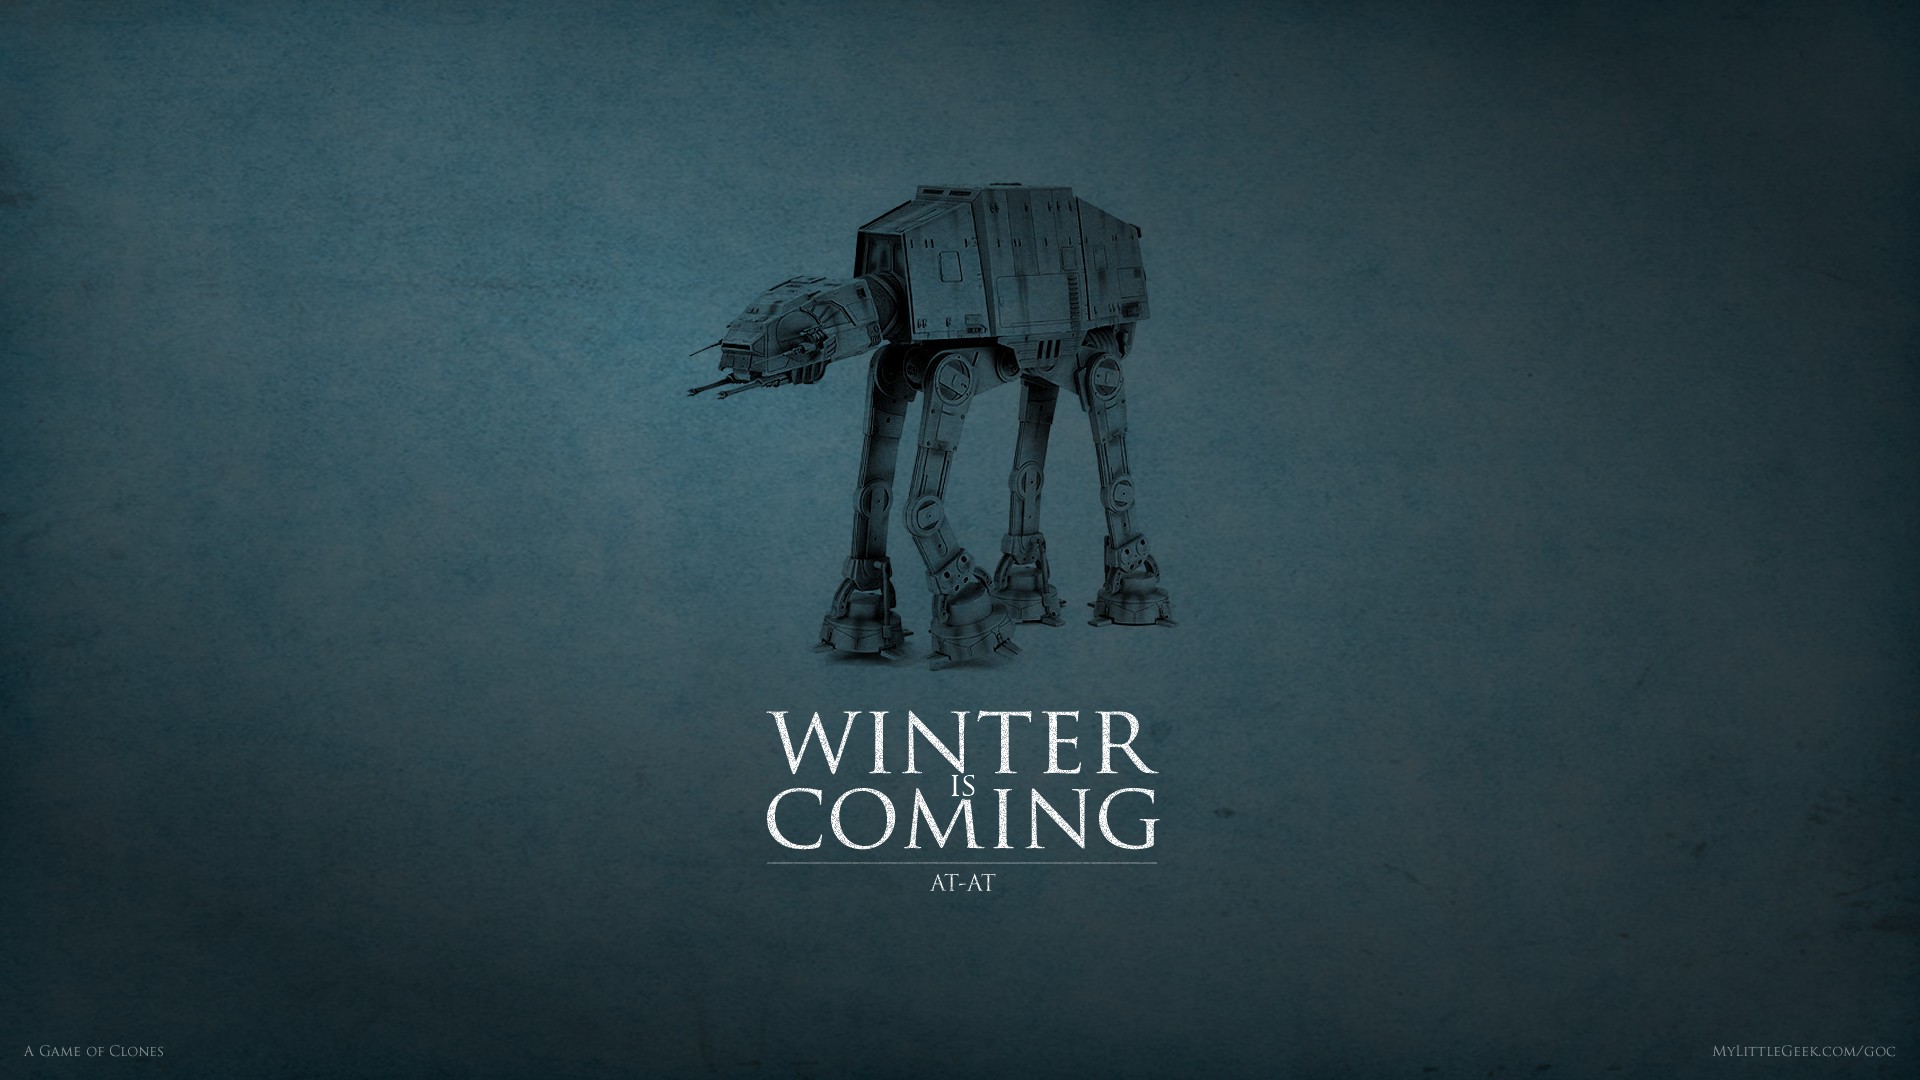 Star Wars, Game of Thrones, Winter is Coming, AT AT, Game of